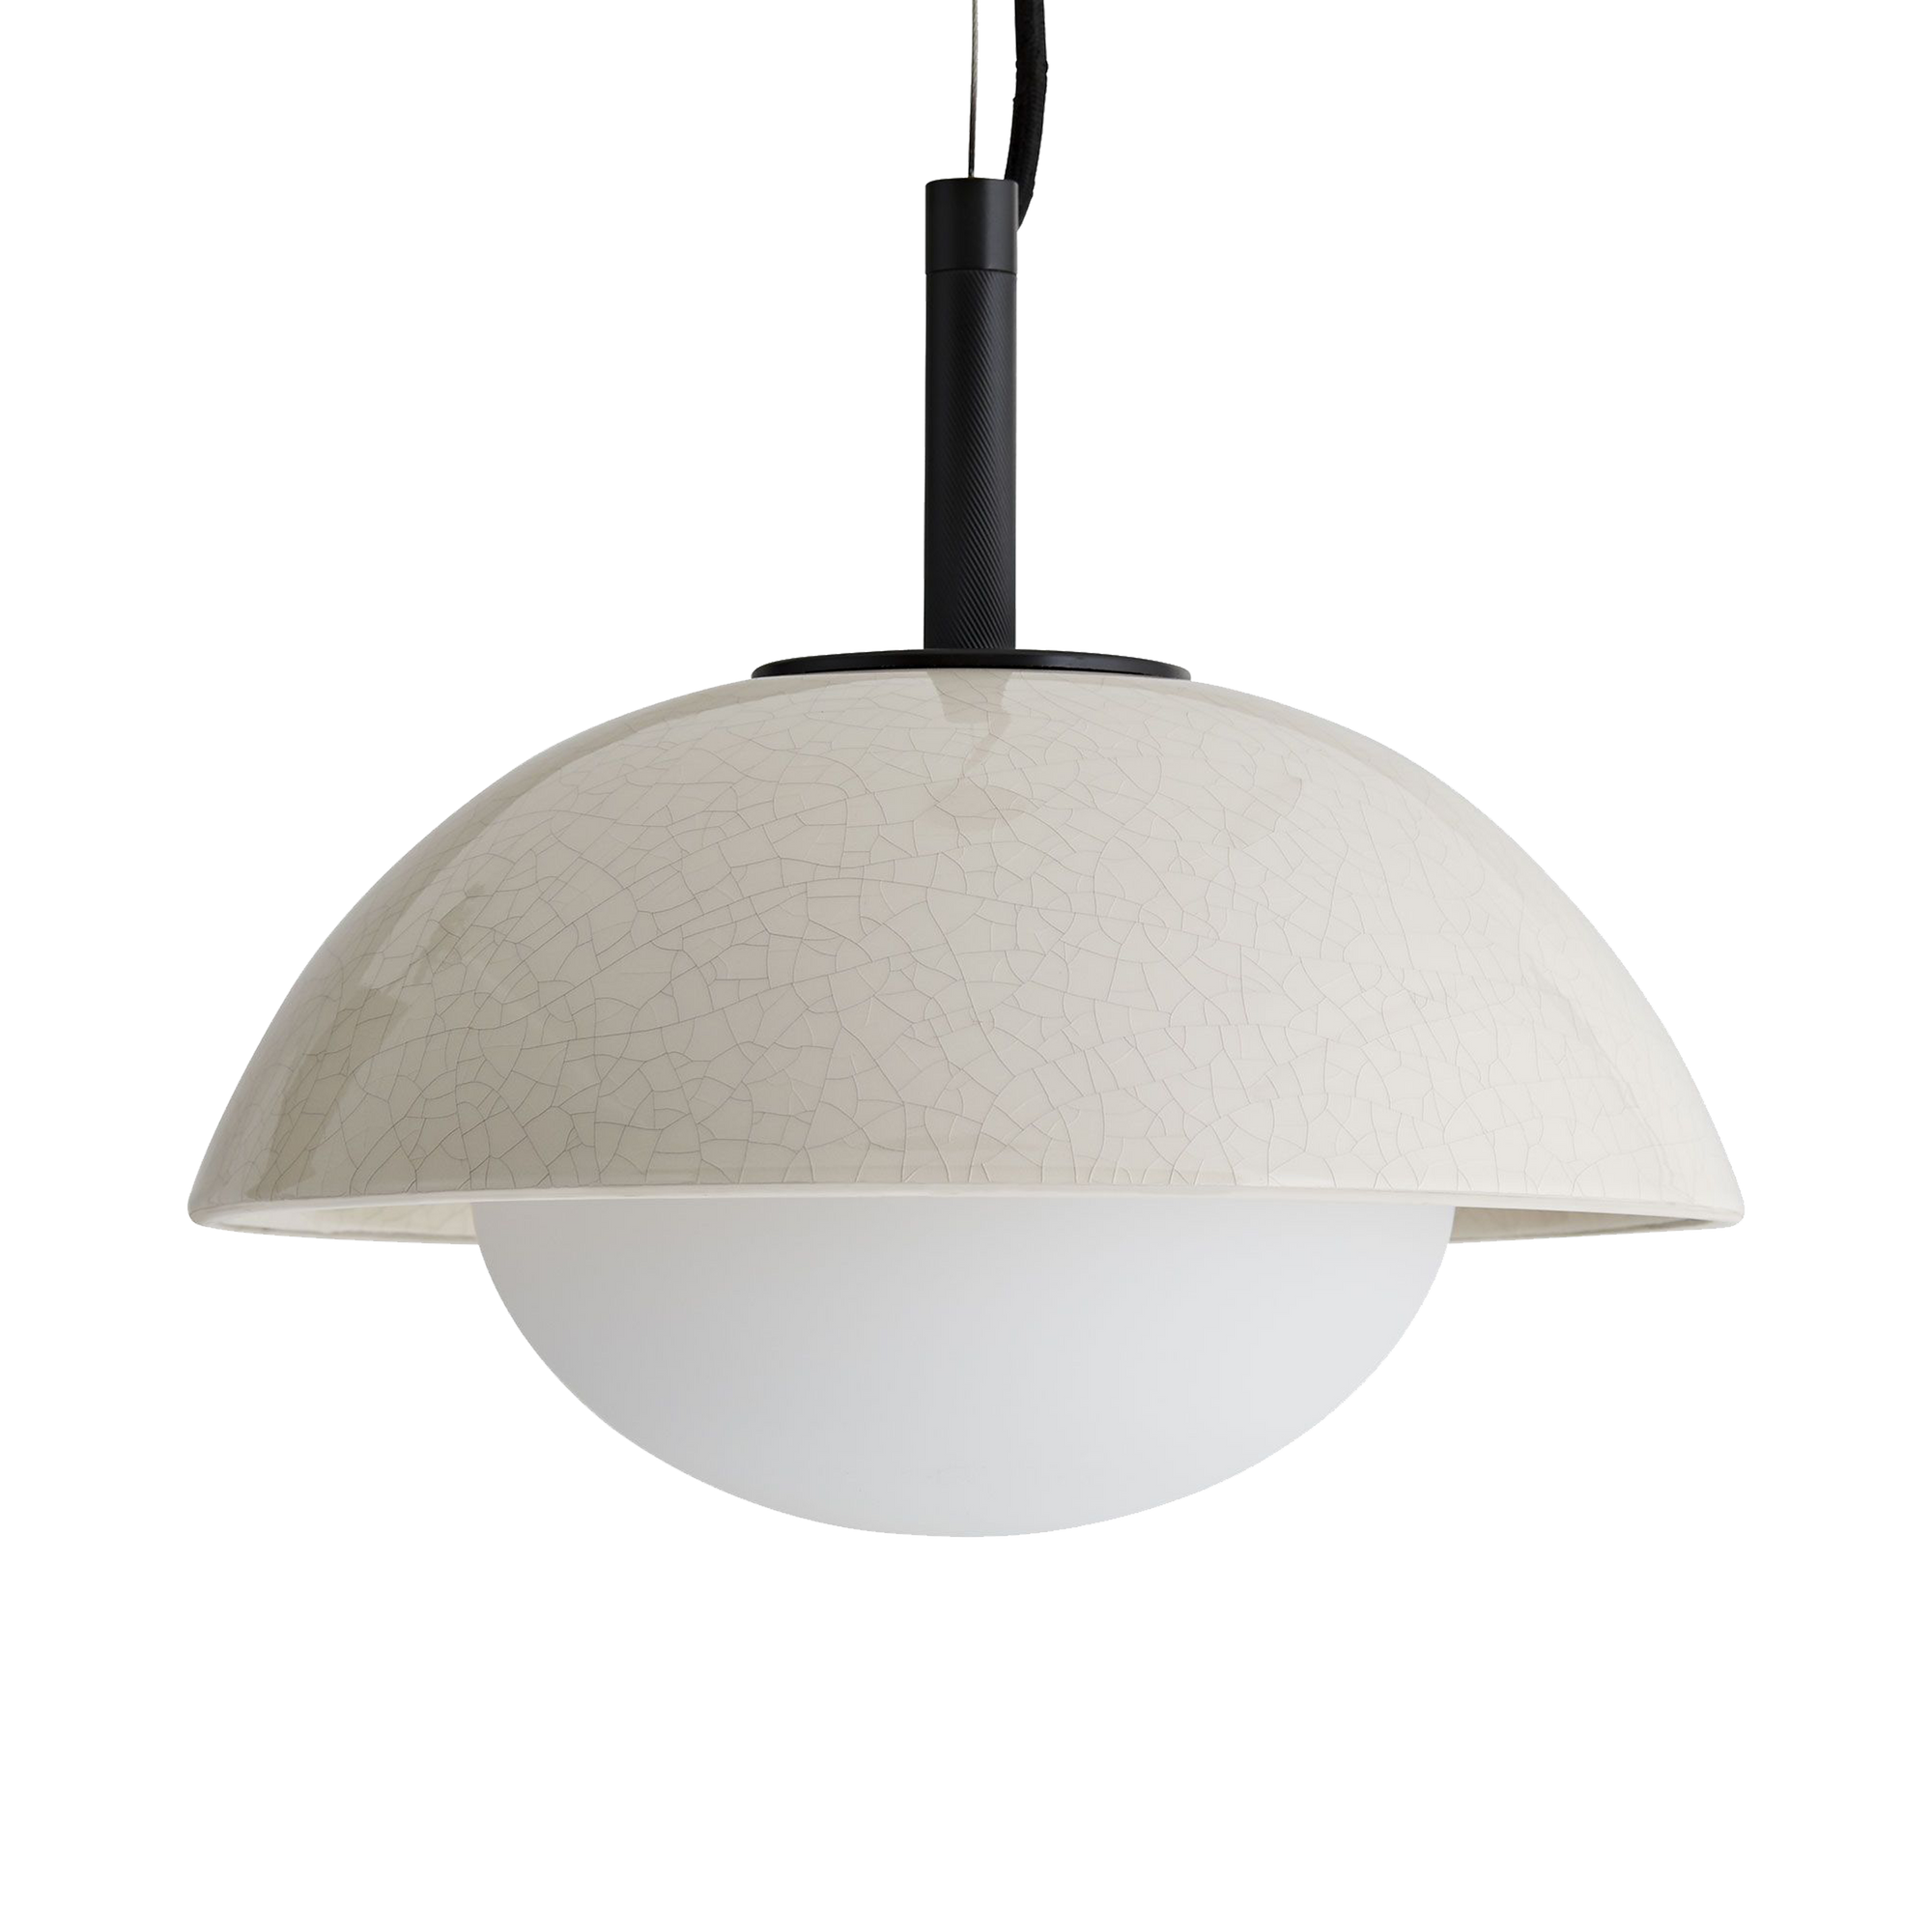 An ultra-versatile pendant that offers dynamic contrast through modern and seemingly handcrafted materials, light and dark hues and thoughtful detailing.